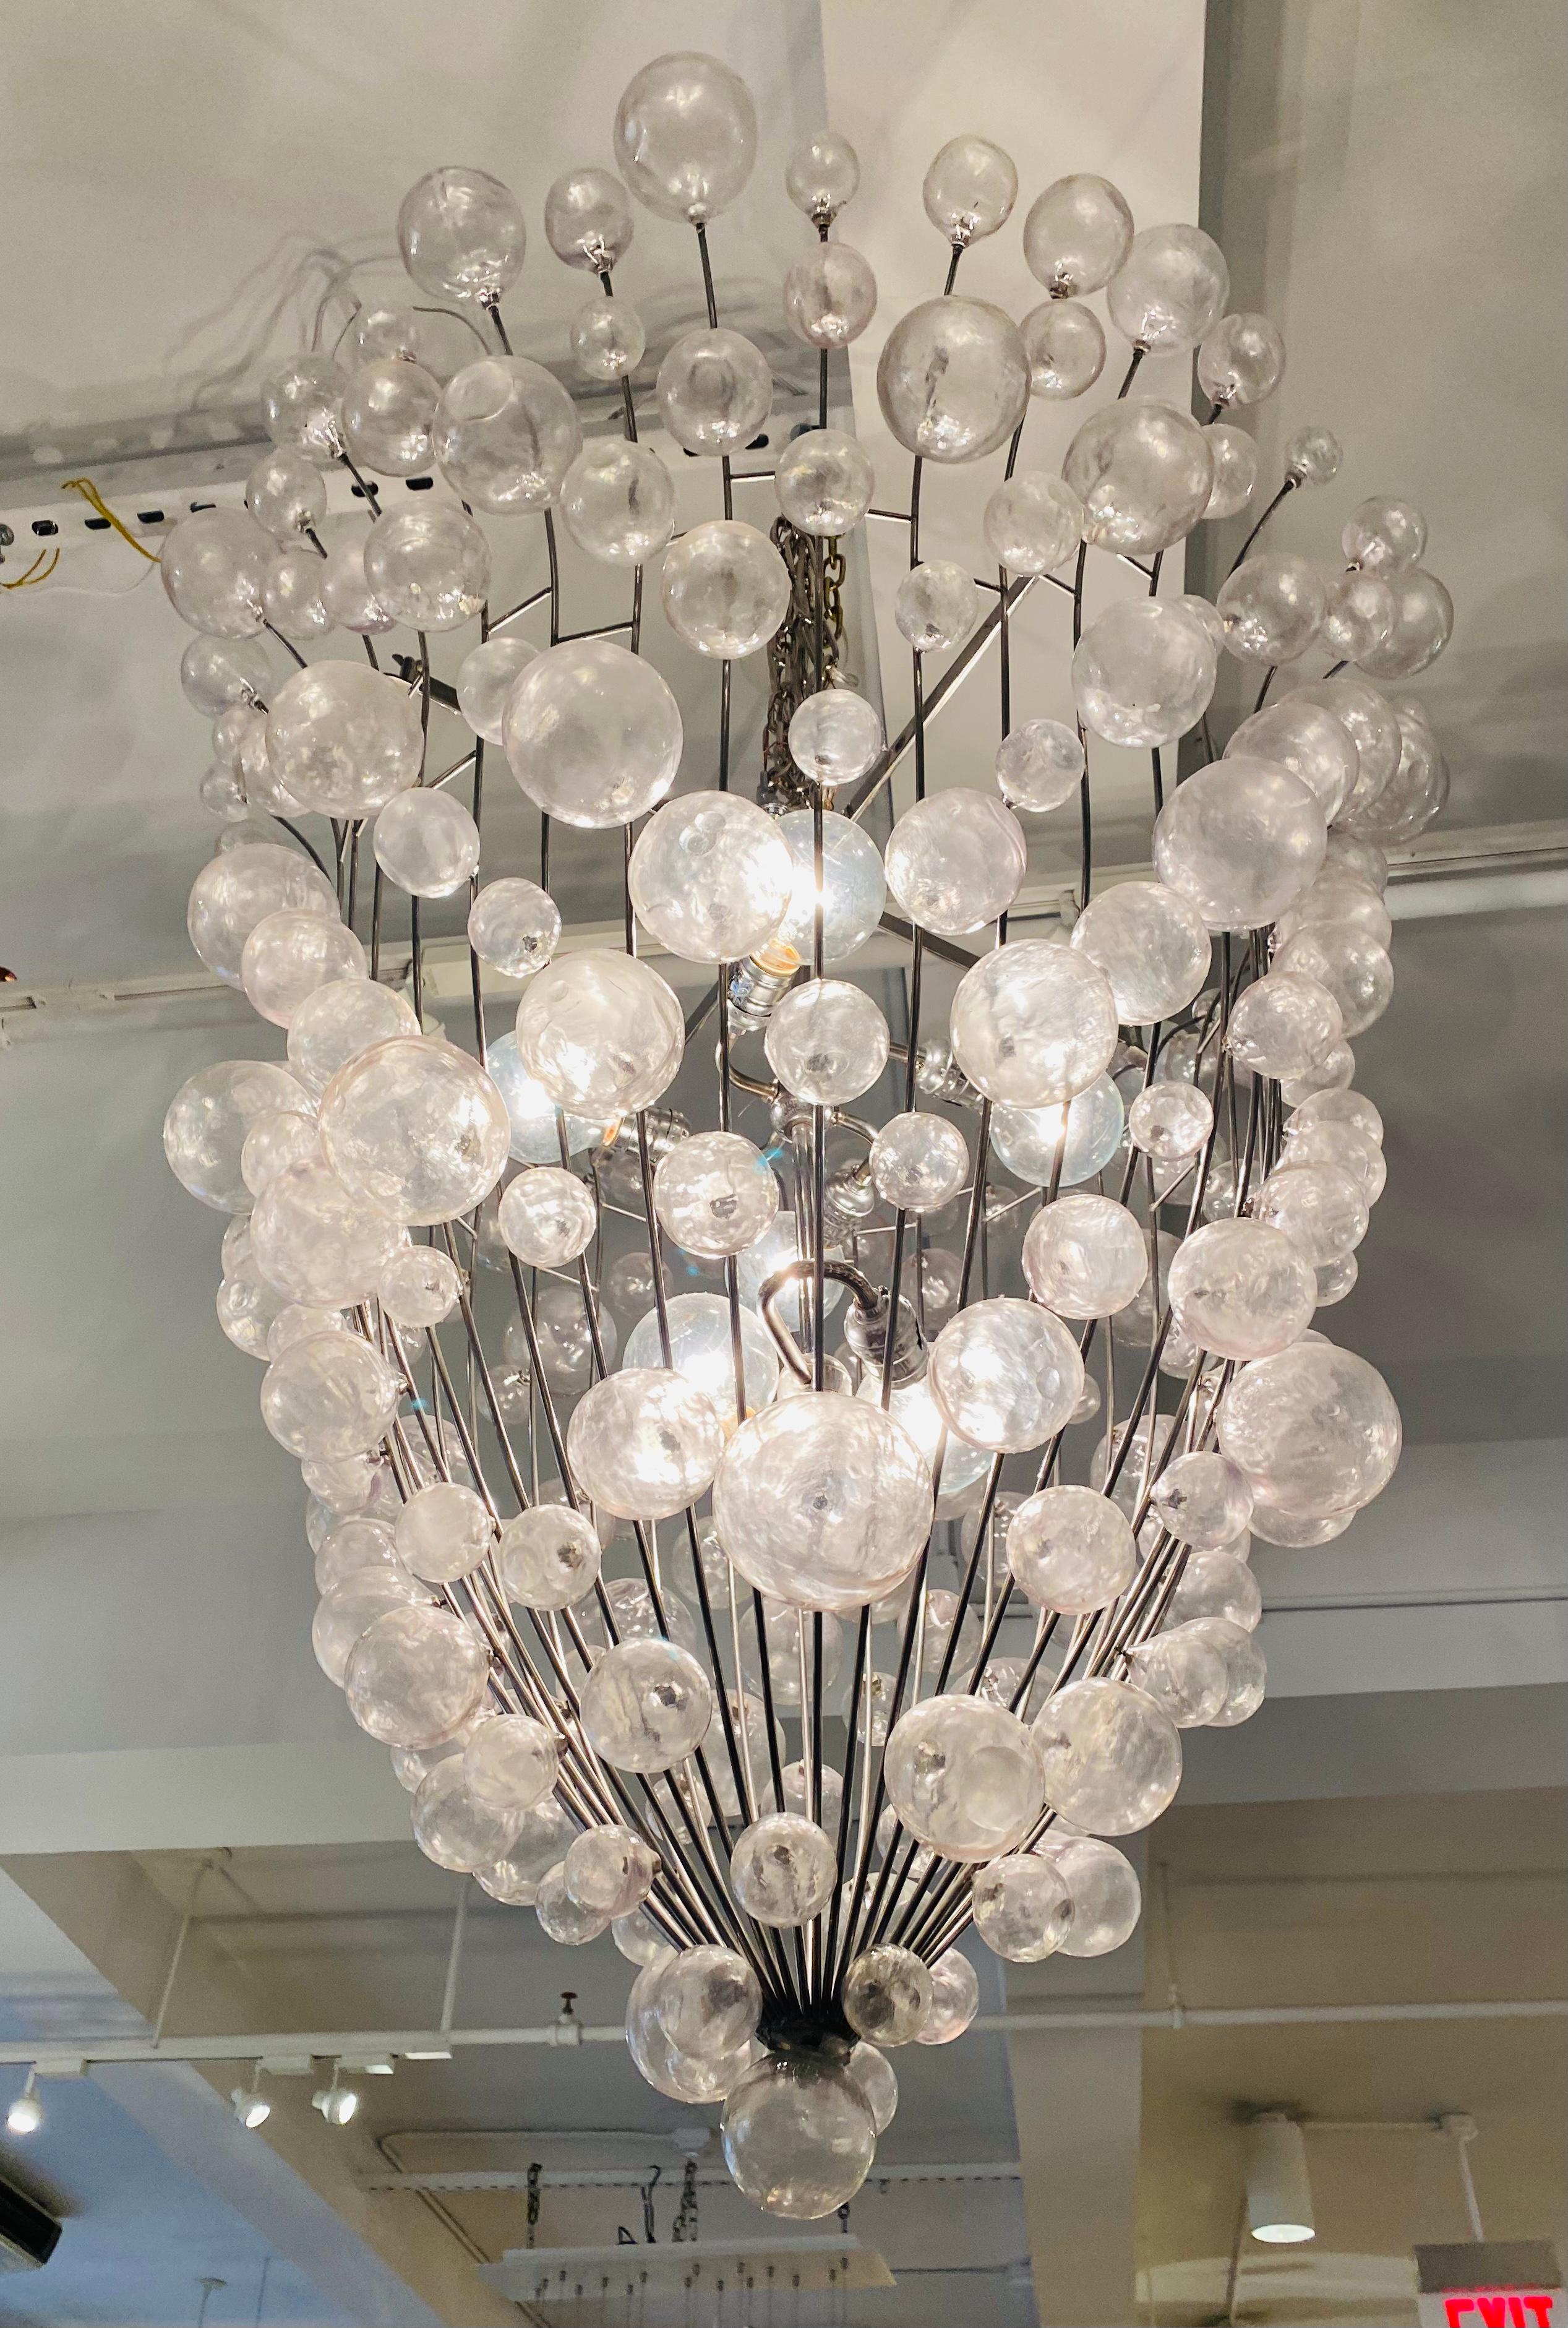 A grand 1990s custom blown resin bubbled chandelier. 10 standard American sockets. Rewired. Adjustable chain. Body is 33” W x 36” H not including the chain. Overall Height, including the chain provided, 103